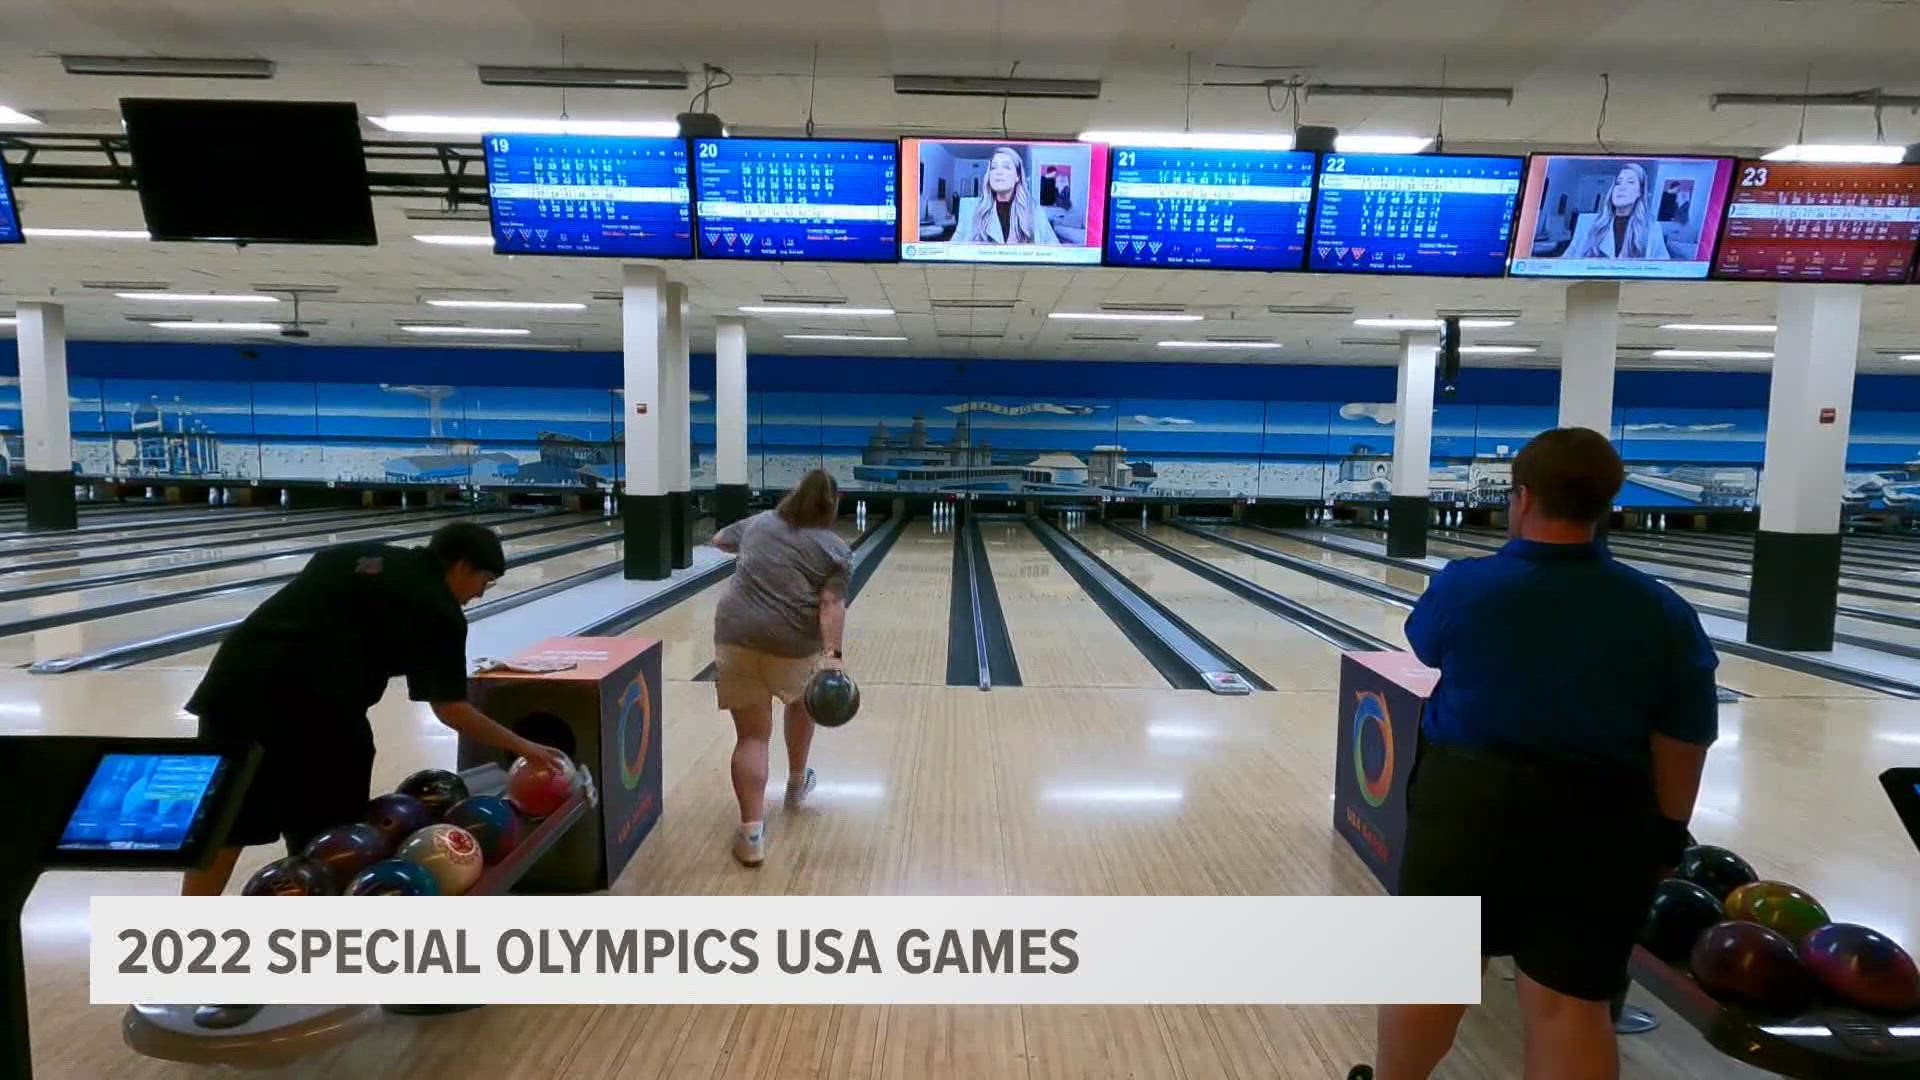 As the Special Olympics continue in Orlando, participants in the bowling competition strive to improve as awards near.